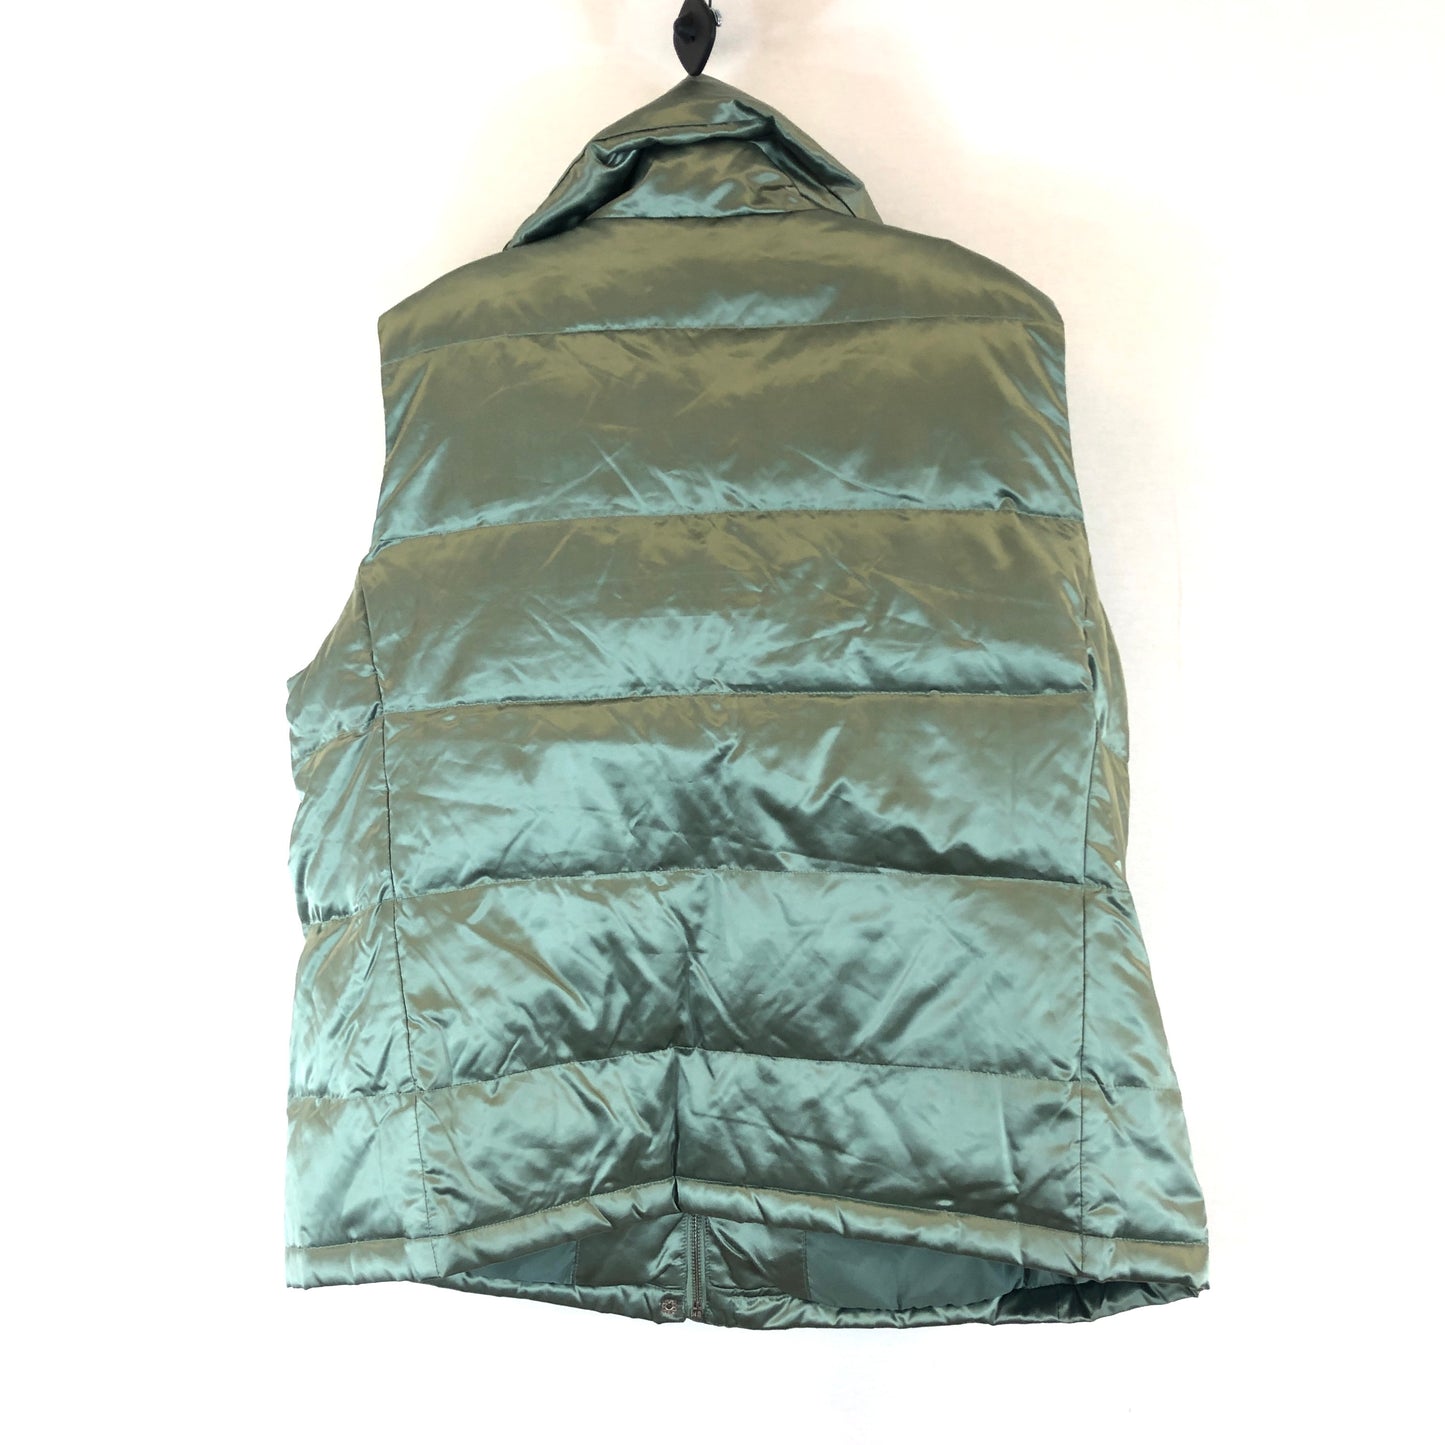 Vest Puffer & Quilted By Talbots  Size: 2x